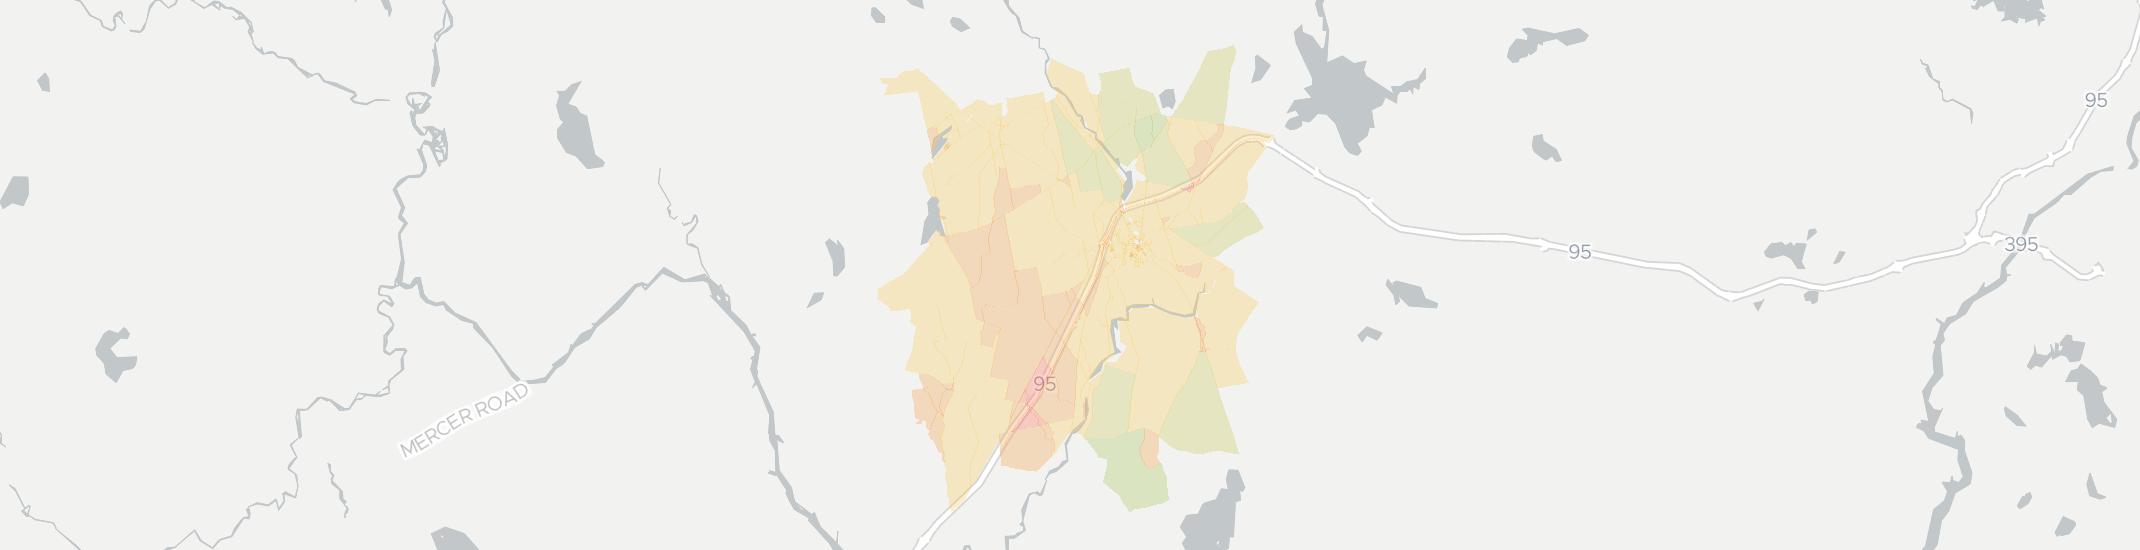 Pittsfield Internet Competition Map. Click for interactive map